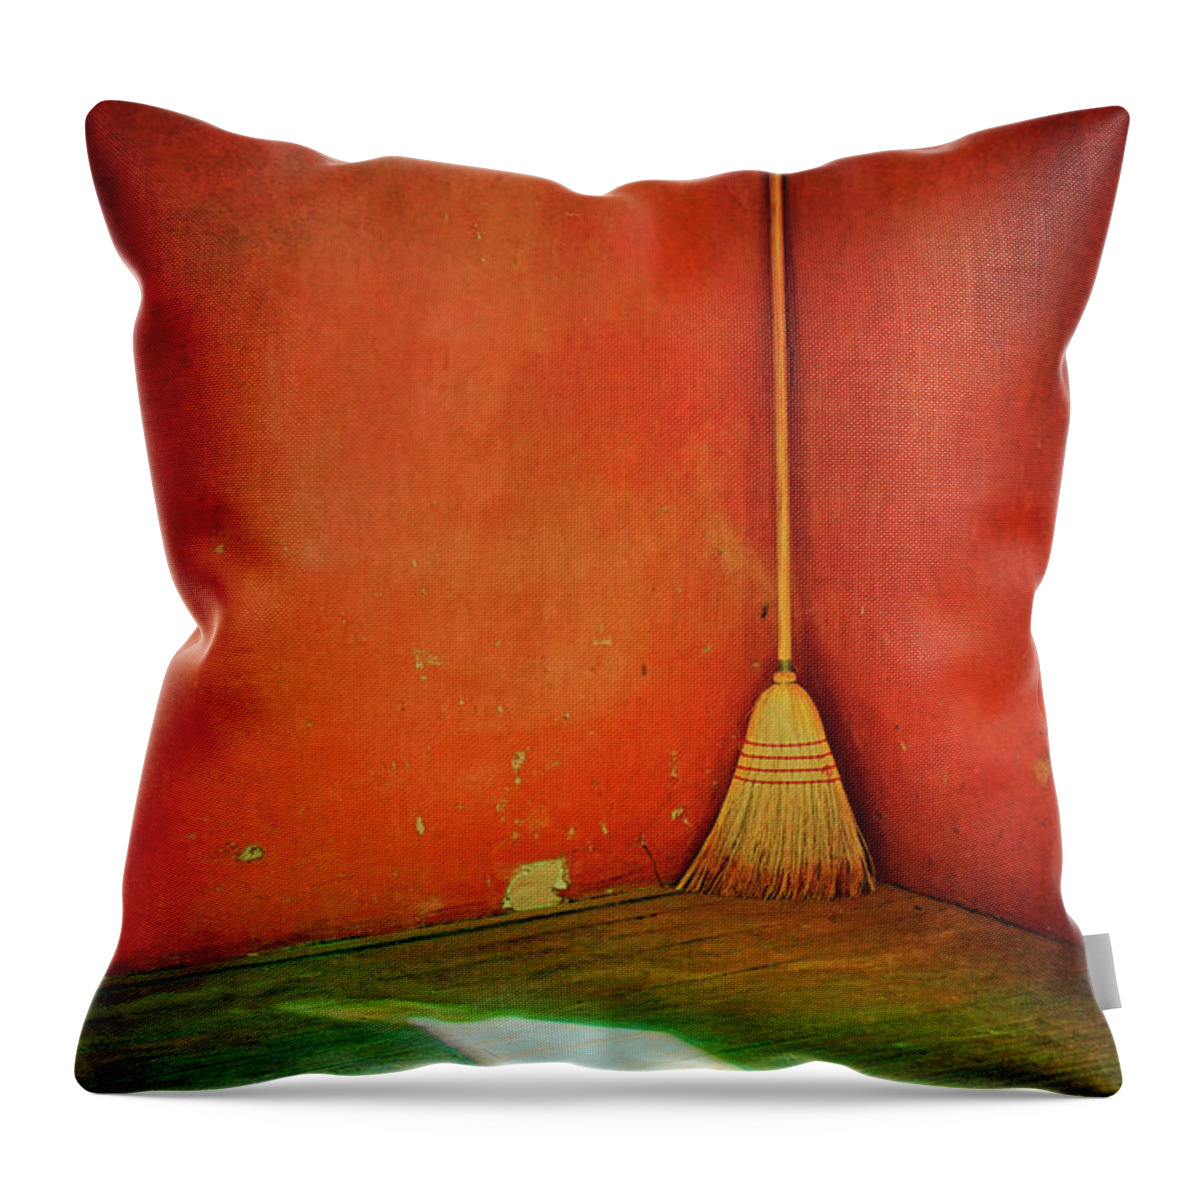 Minimalism Throw Pillow featuring the photograph Broom by Nikolyn McDonald